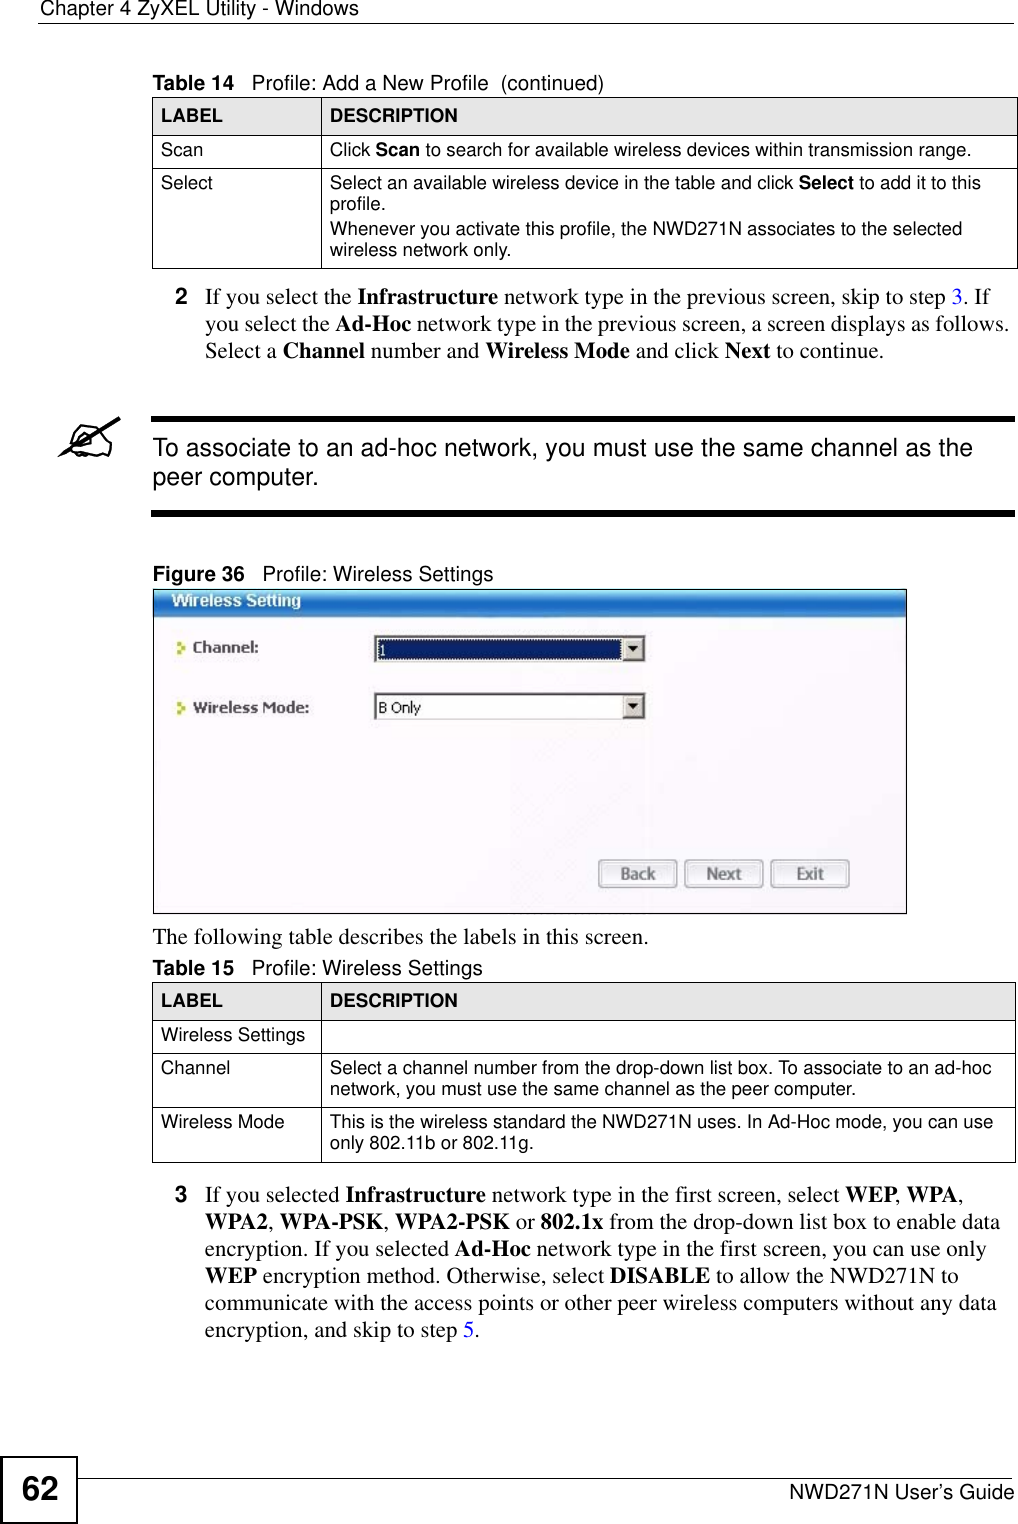 Chapter 4 ZyXEL Utility - WindowsNWD271N User’s Guide622If you select the Infrastructure network type in the previous screen, skip to step 3. If you select the Ad-Hoc network type in the previous screen, a screen displays as follows. Select a Channel number and Wireless Mode and click Next to continue.&quot;To associate to an ad-hoc network, you must use the same channel as the peer computer.Figure 36   Profile: Wireless Settings The following table describes the labels in this screen. 3If you selected Infrastructure network type in the first screen, select WEP, WPA, WPA2, WPA-PSK, WPA2-PSK or 802.1x from the drop-down list box to enable data encryption. If you selected Ad-Hoc network type in the first screen, you can use only WEP encryption method. Otherwise, select DISABLE to allow the NWD271N to communicate with the access points or other peer wireless computers without any data encryption, and skip to step 5.Scan Click Scan to search for available wireless devices within transmission range.Select Select an available wireless device in the table and click Select to add it to this profile.Whenever you activate this profile, the NWD271N associates to the selected wireless network only.Table 14   Profile: Add a New Profile  (continued)LABEL DESCRIPTIONTable 15   Profile: Wireless Settings LABEL DESCRIPTIONWireless SettingsChannel Select a channel number from the drop-down list box. To associate to an ad-hoc network, you must use the same channel as the peer computer.Wireless Mode This is the wireless standard the NWD271N uses. In Ad-Hoc mode, you can use only 802.11b or 802.11g.